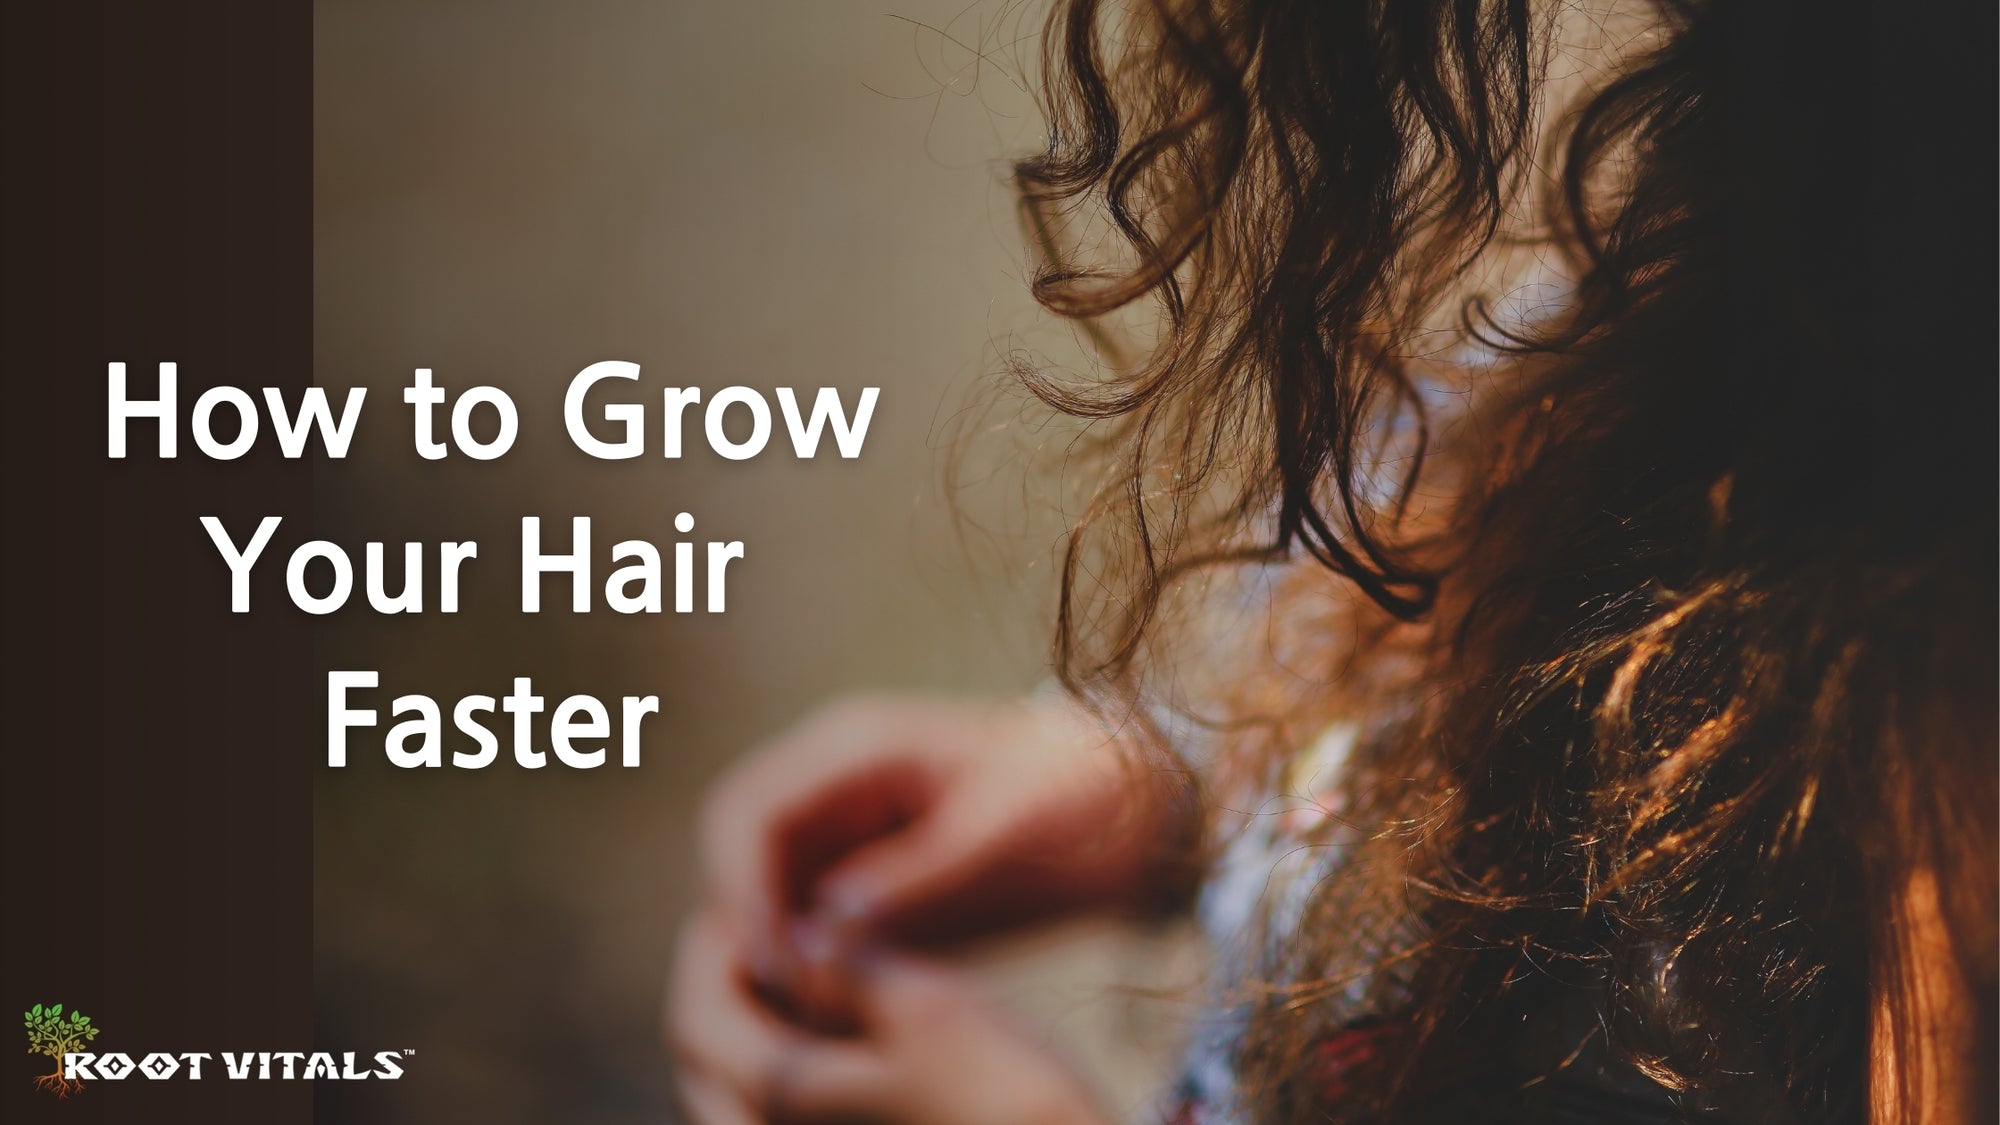 Fruits for Hair Growth: 8 Fruits to Choose From - HK Vitals